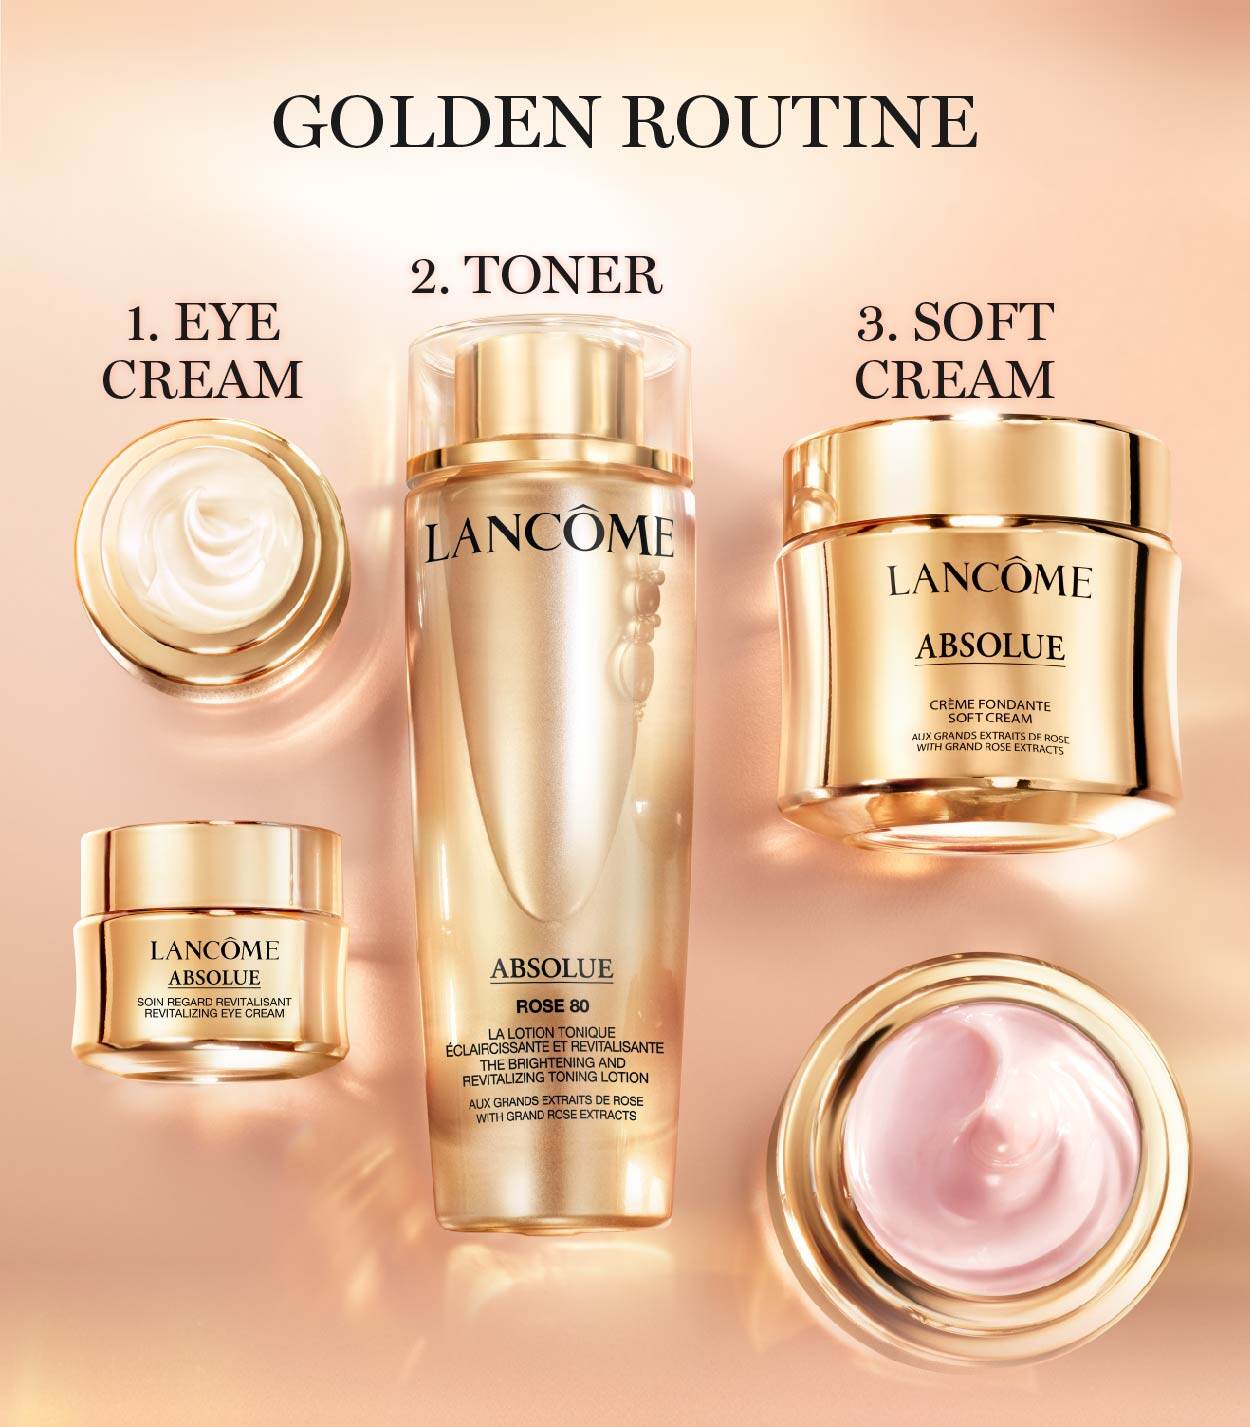 Kem Chống Nắng LANCÔME Global Youth Protecting Care UV Protection